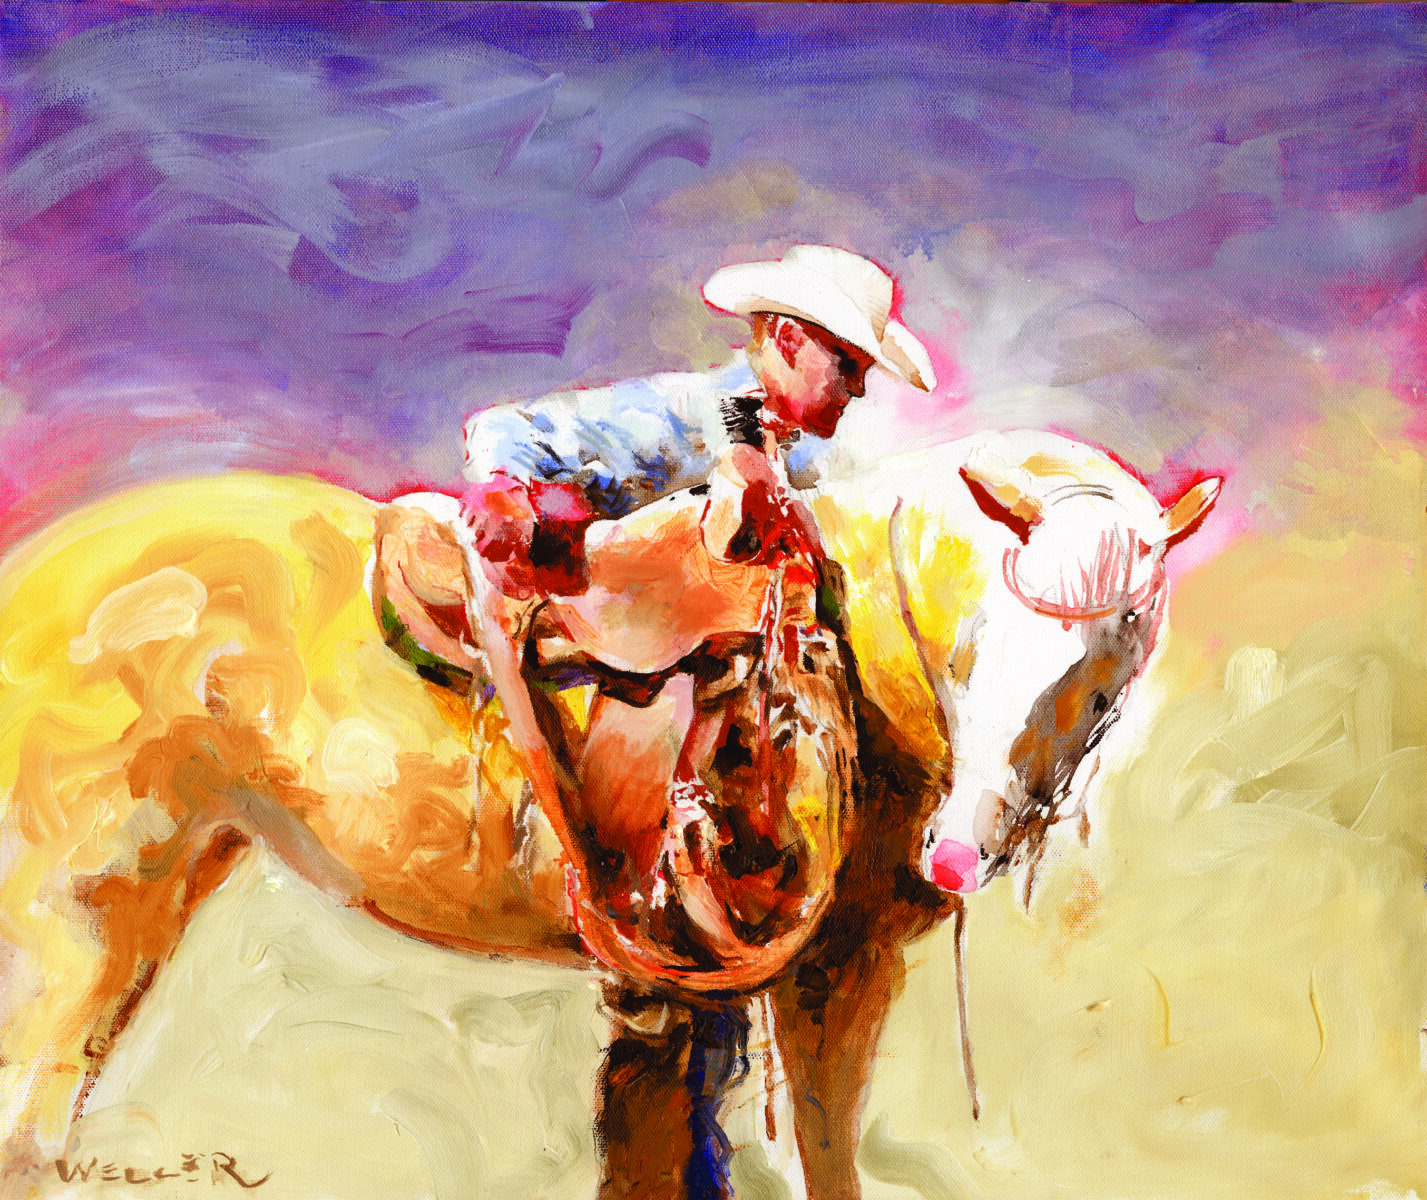 Museum presents the Western Art Show & Sale